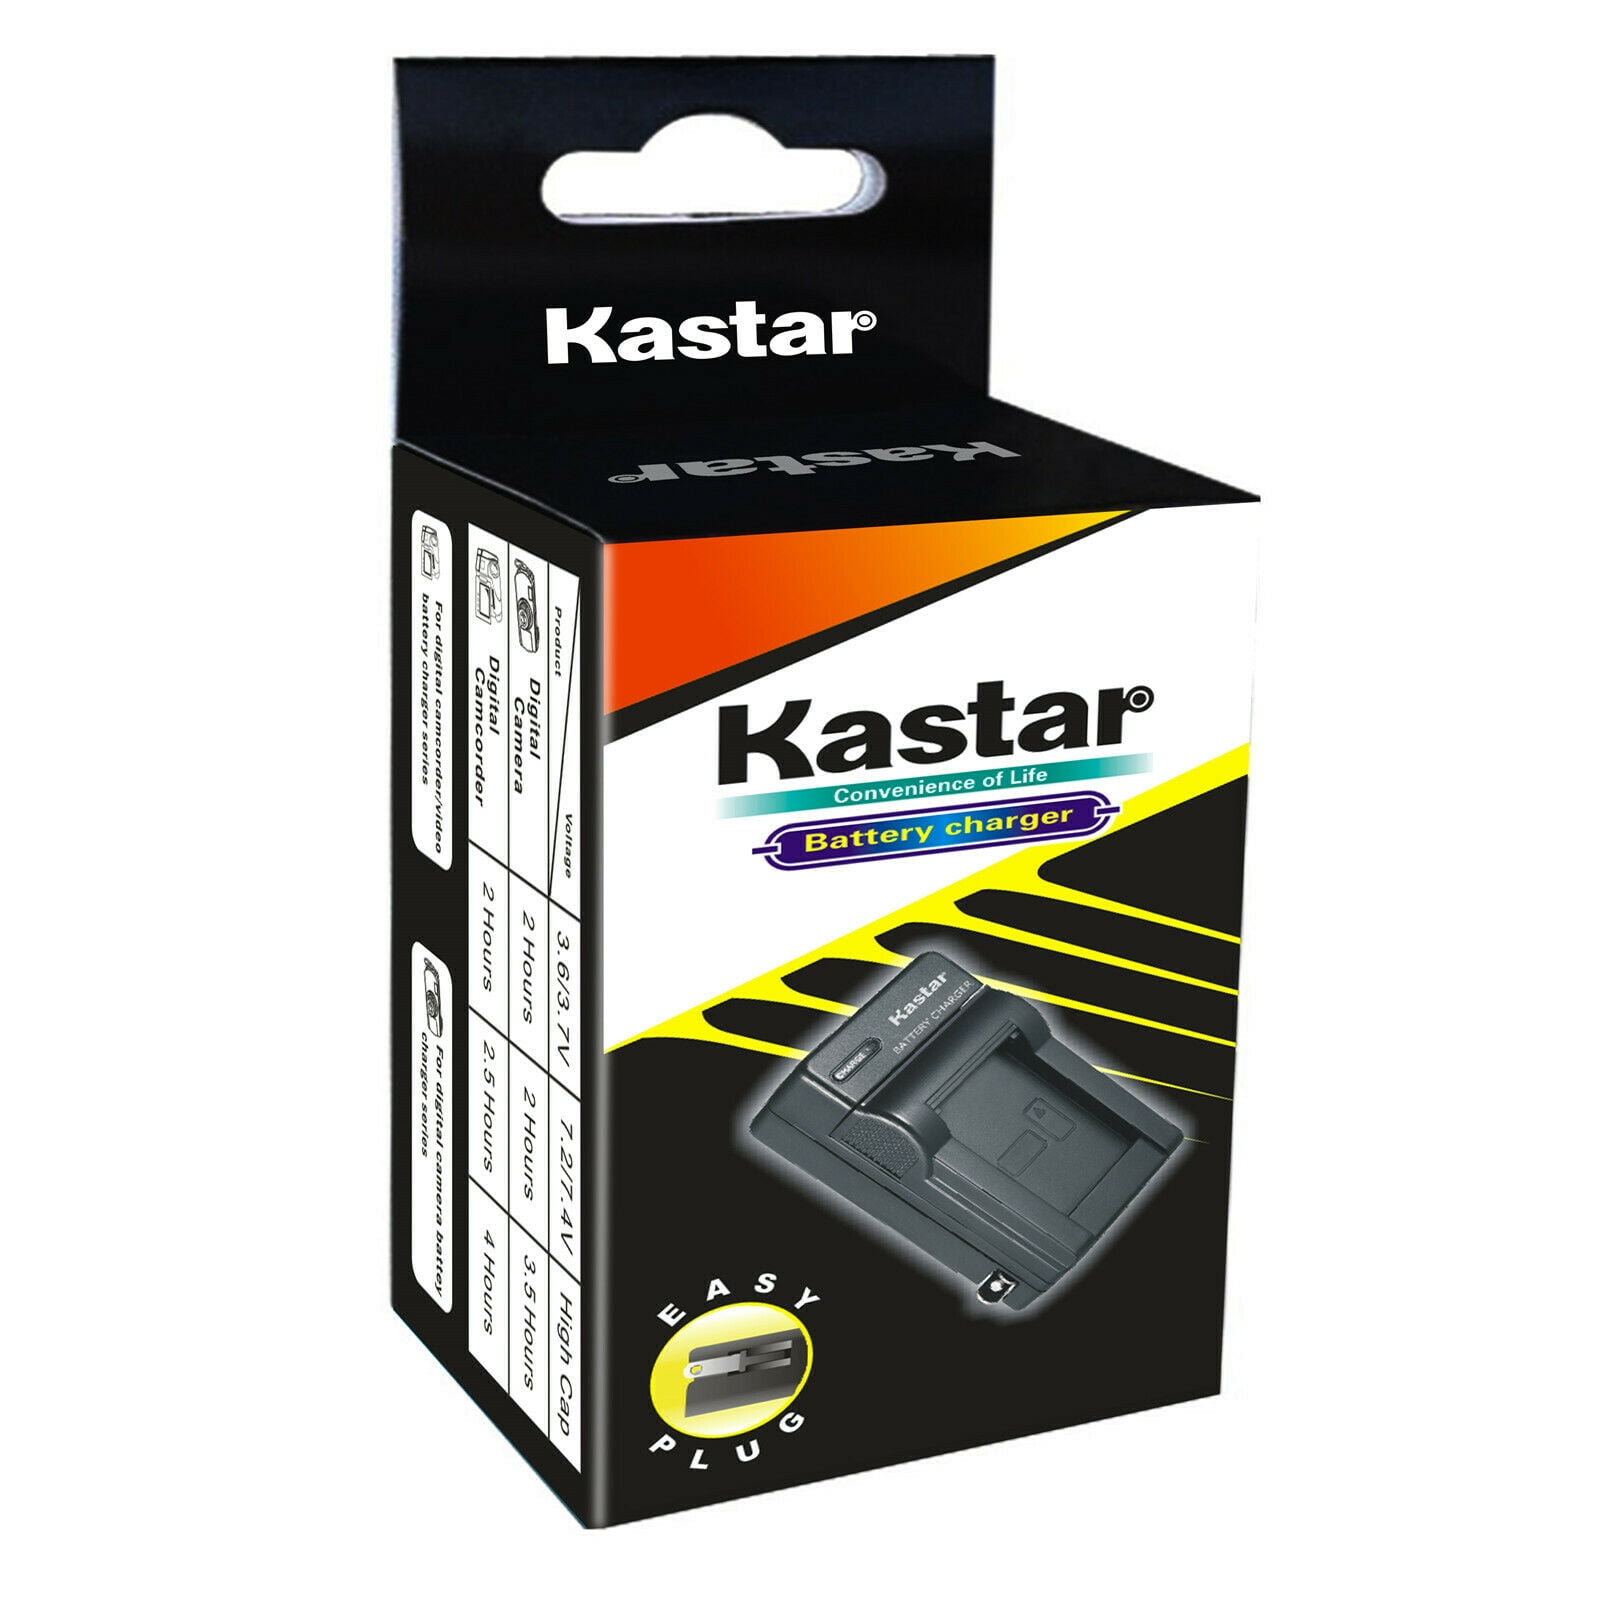 Kastar AC Wall Battery Charger Replacement for Kodak LB-060 LB060 Battery, Kodak  PixPro AZ365, PixPro AZ421, PixPro AZ501, PixPro AZ521, PixPro AZ522, PixPro  AZ525, PixPro AZ526 Cameras 